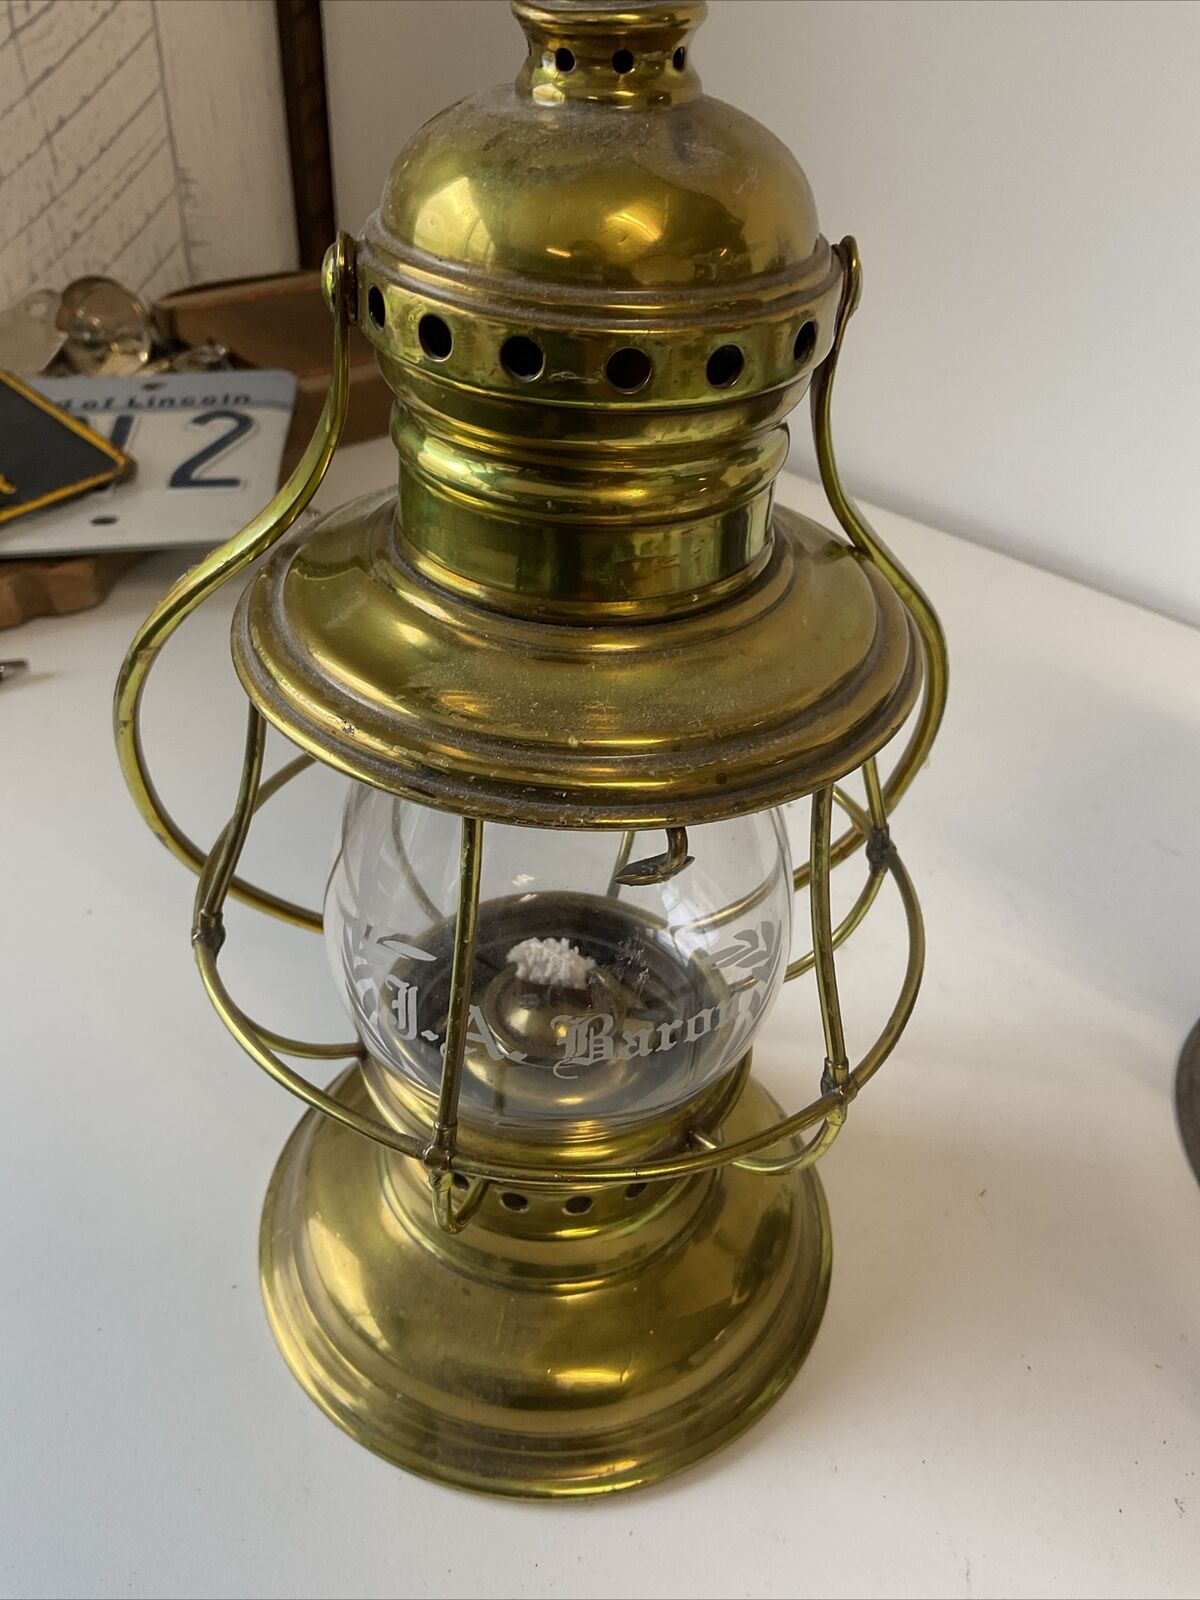 Rare Peter Grey &sons Presentation Lantern Marked J.A. BARON APPEARS TO BE UNFIR